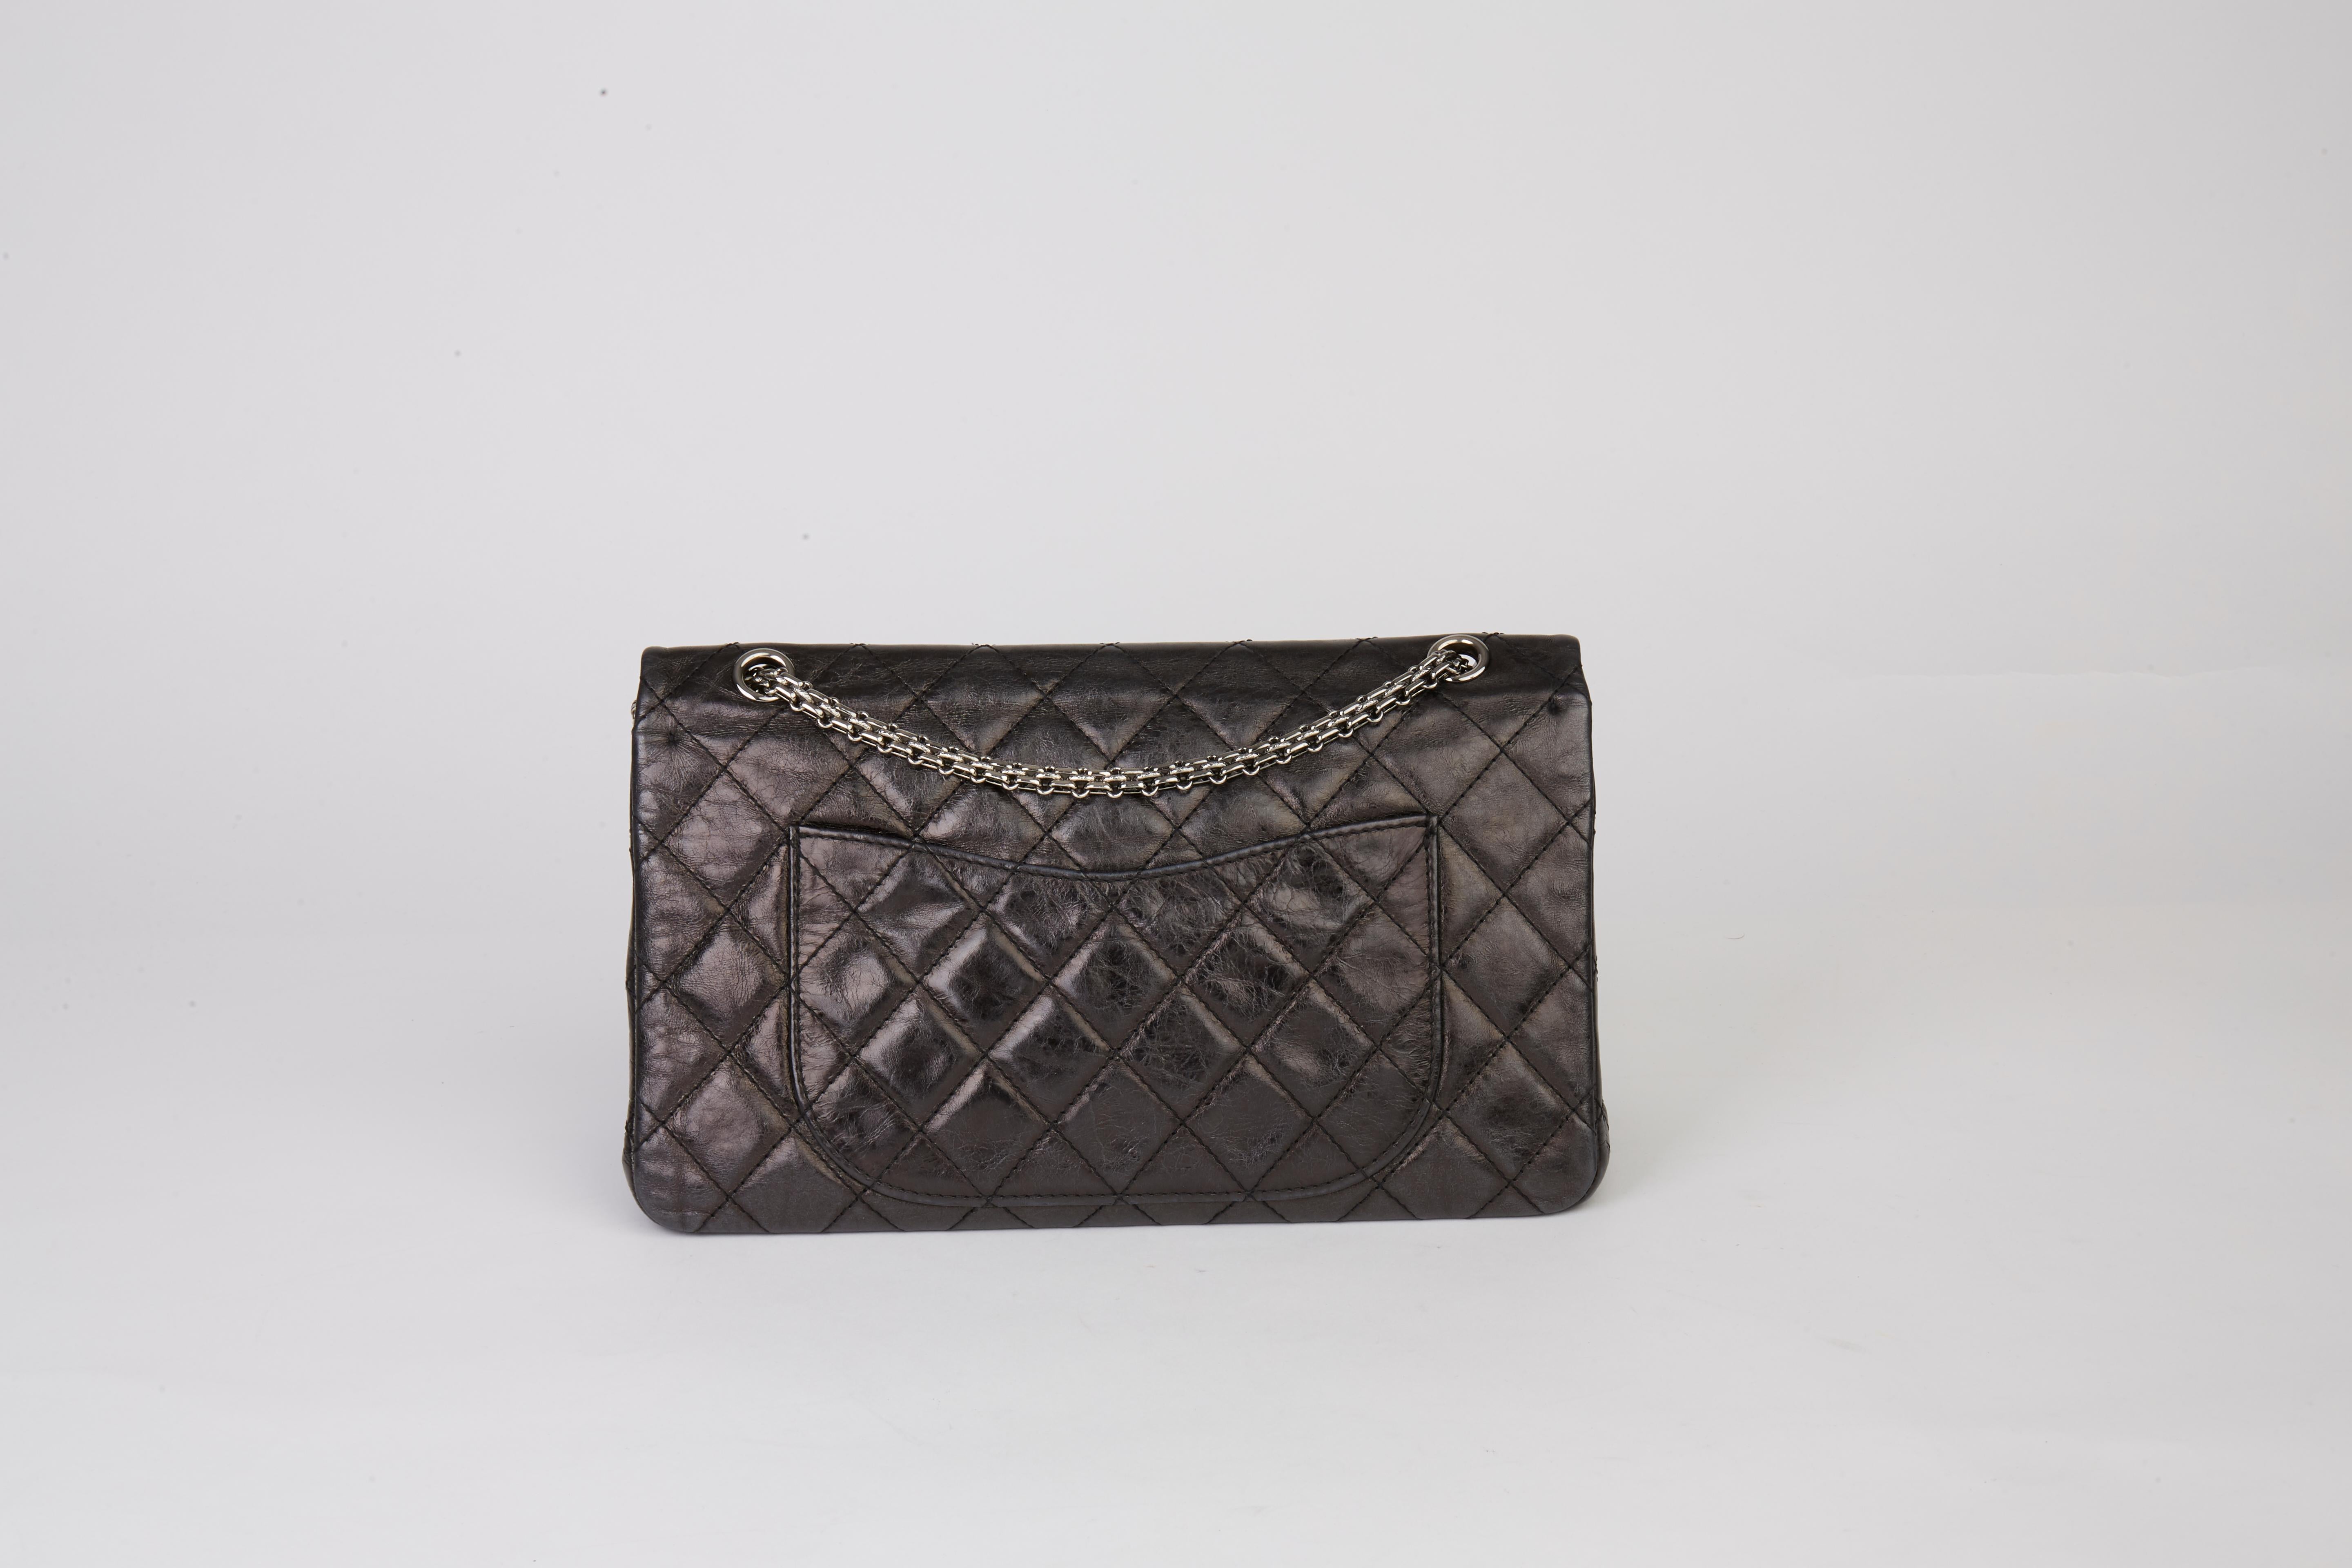 Women's Chanel Black Quilted Metallic Aged Calfskin 2.55 Reissue 227 Double Flap Bag